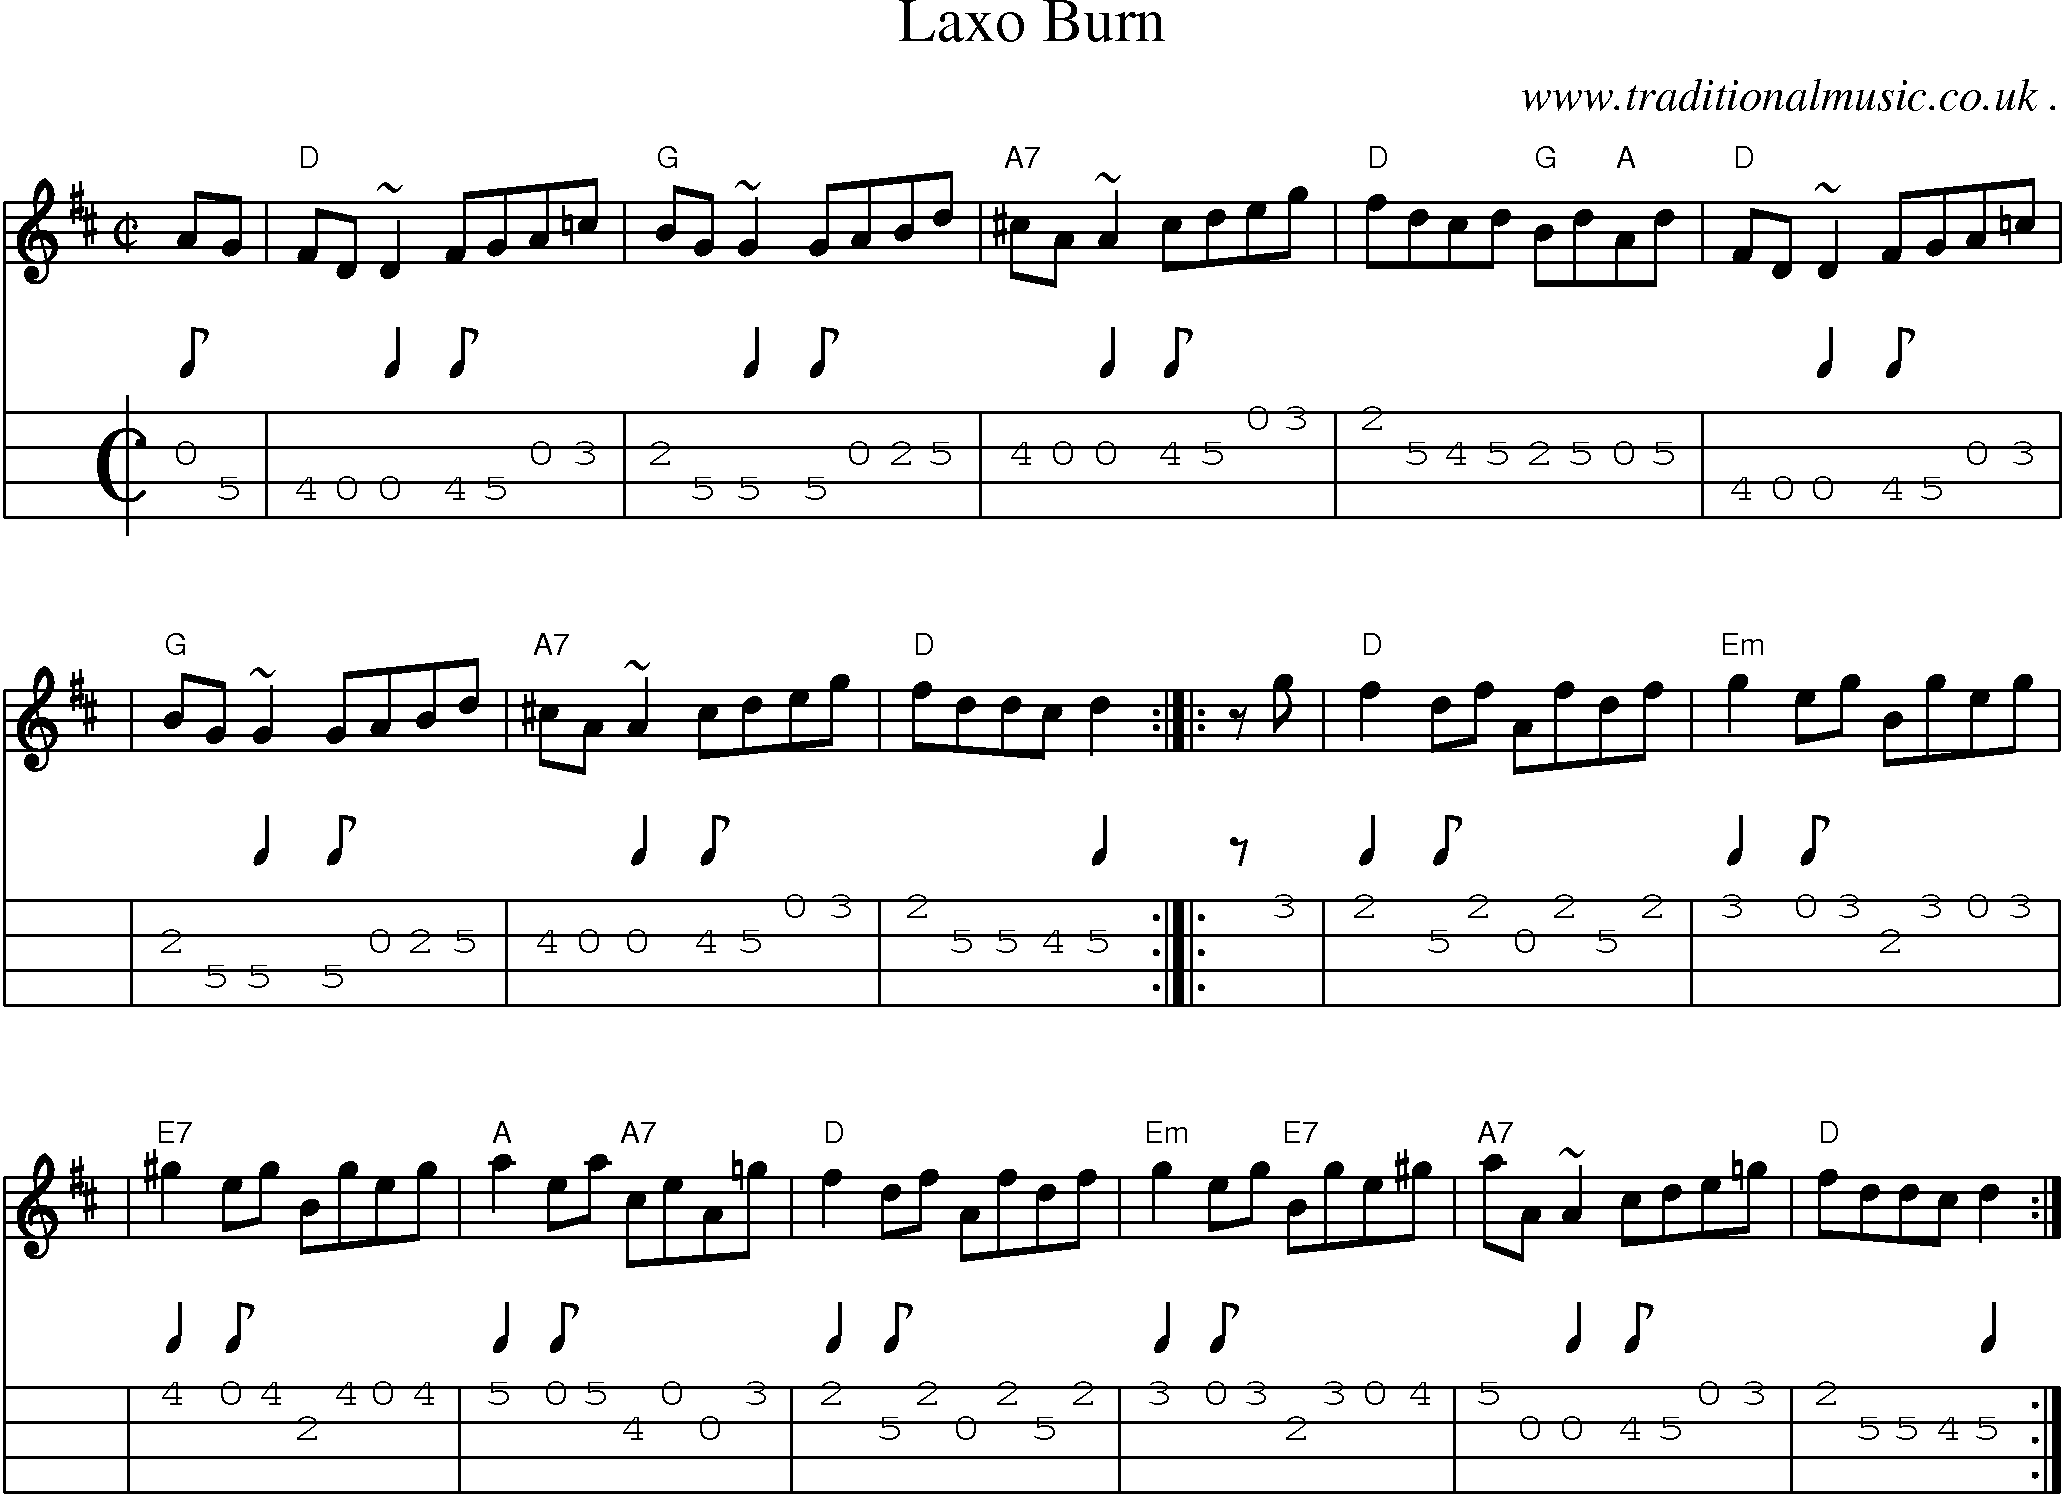 Sheet-music  score, Chords and Mandolin Tabs for Laxo Burn